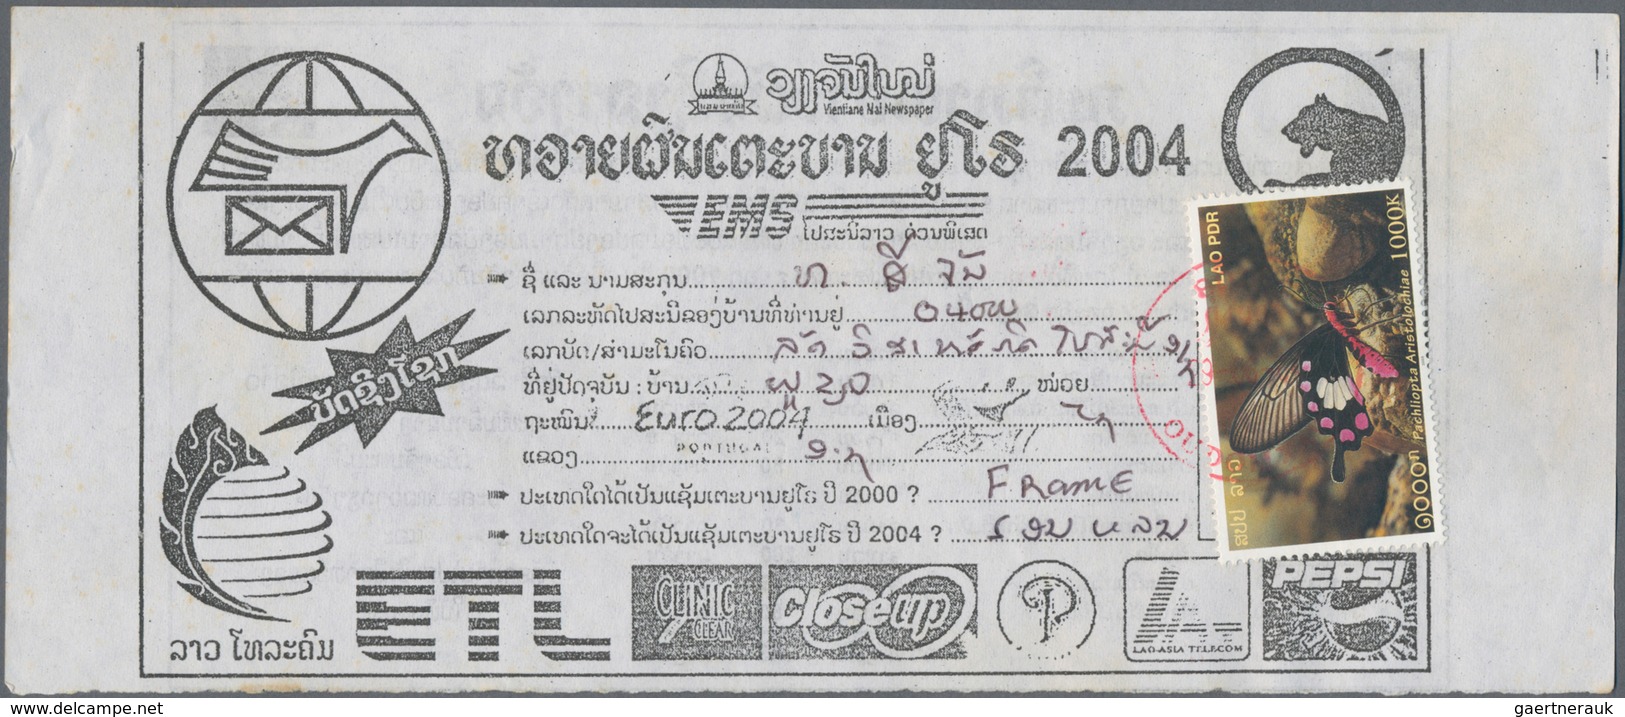 Laos: 2004: 50 EMS Courier Forms Each Franked By Nice Stamps Depicting Fishes Or Butterflies, Cancel - Laos